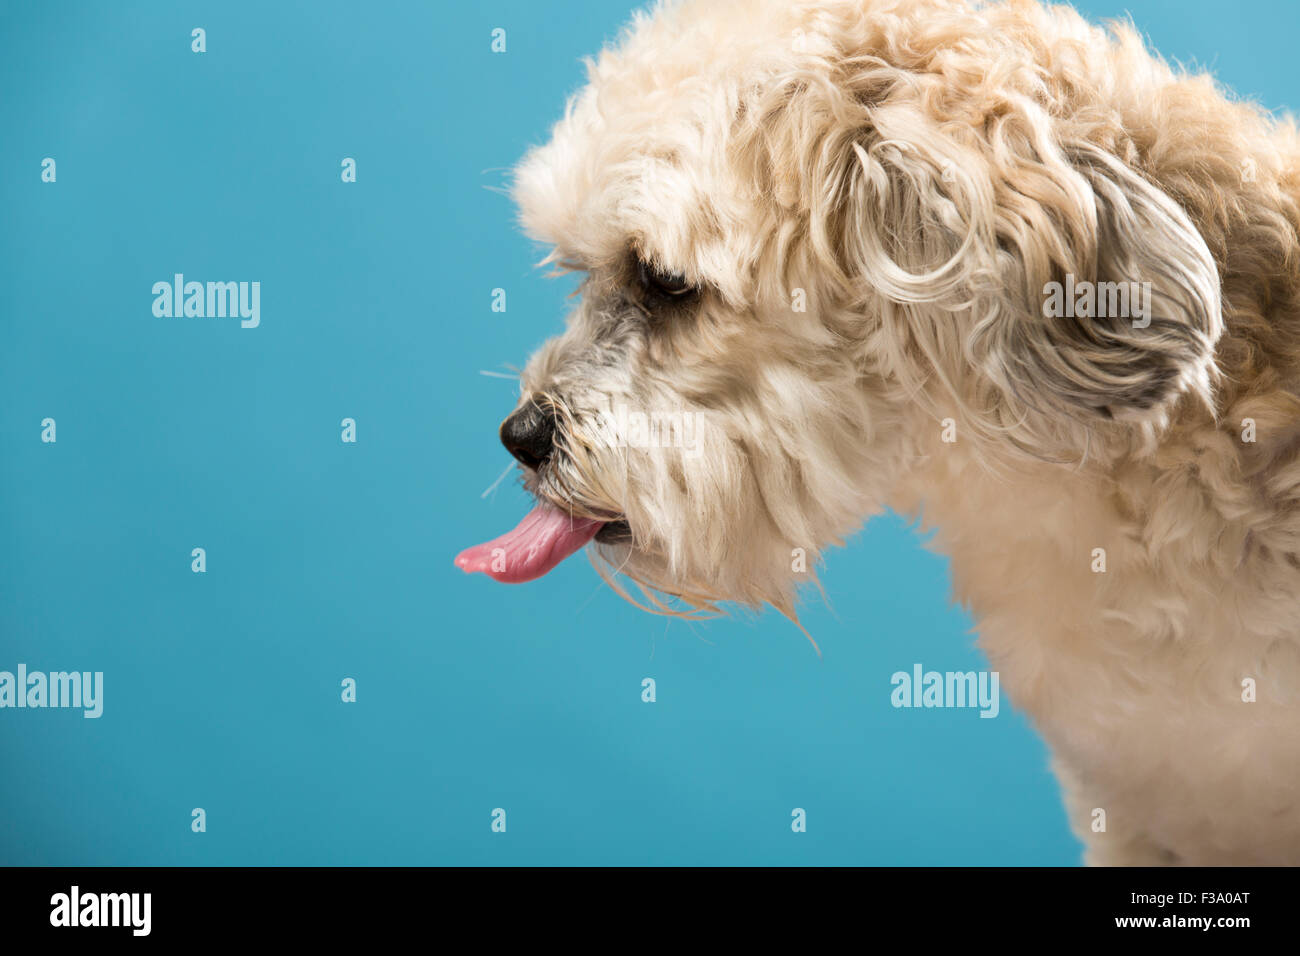 Portrait of a Bichon Frise dog sticking its tongue out against a blue backdrop Stock Photo